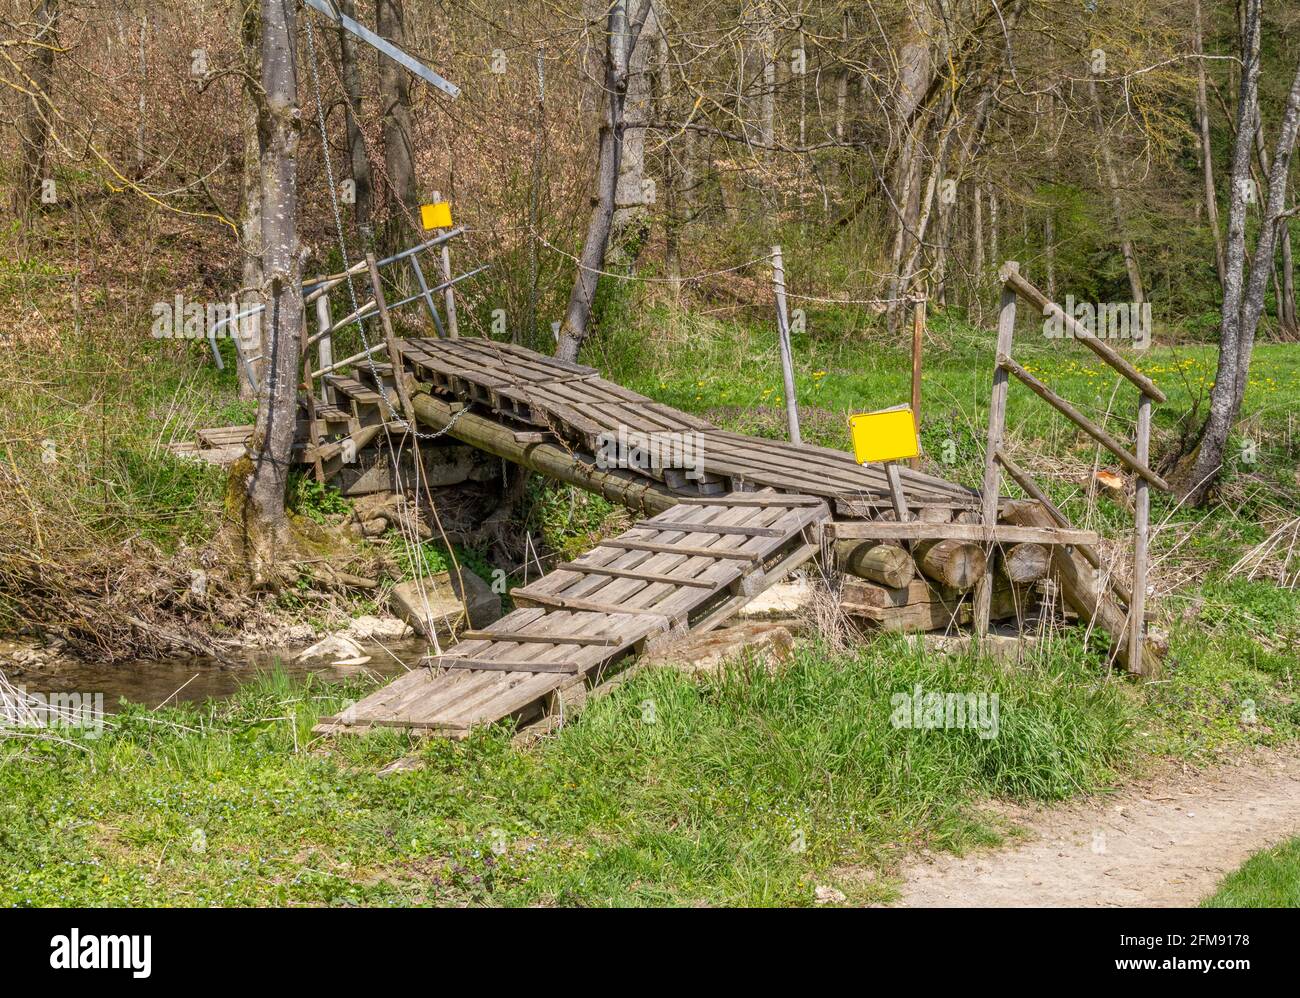 Improvised ramshackle wooden self-made bridge over a rivulet in sunny ambiance Stock Photo